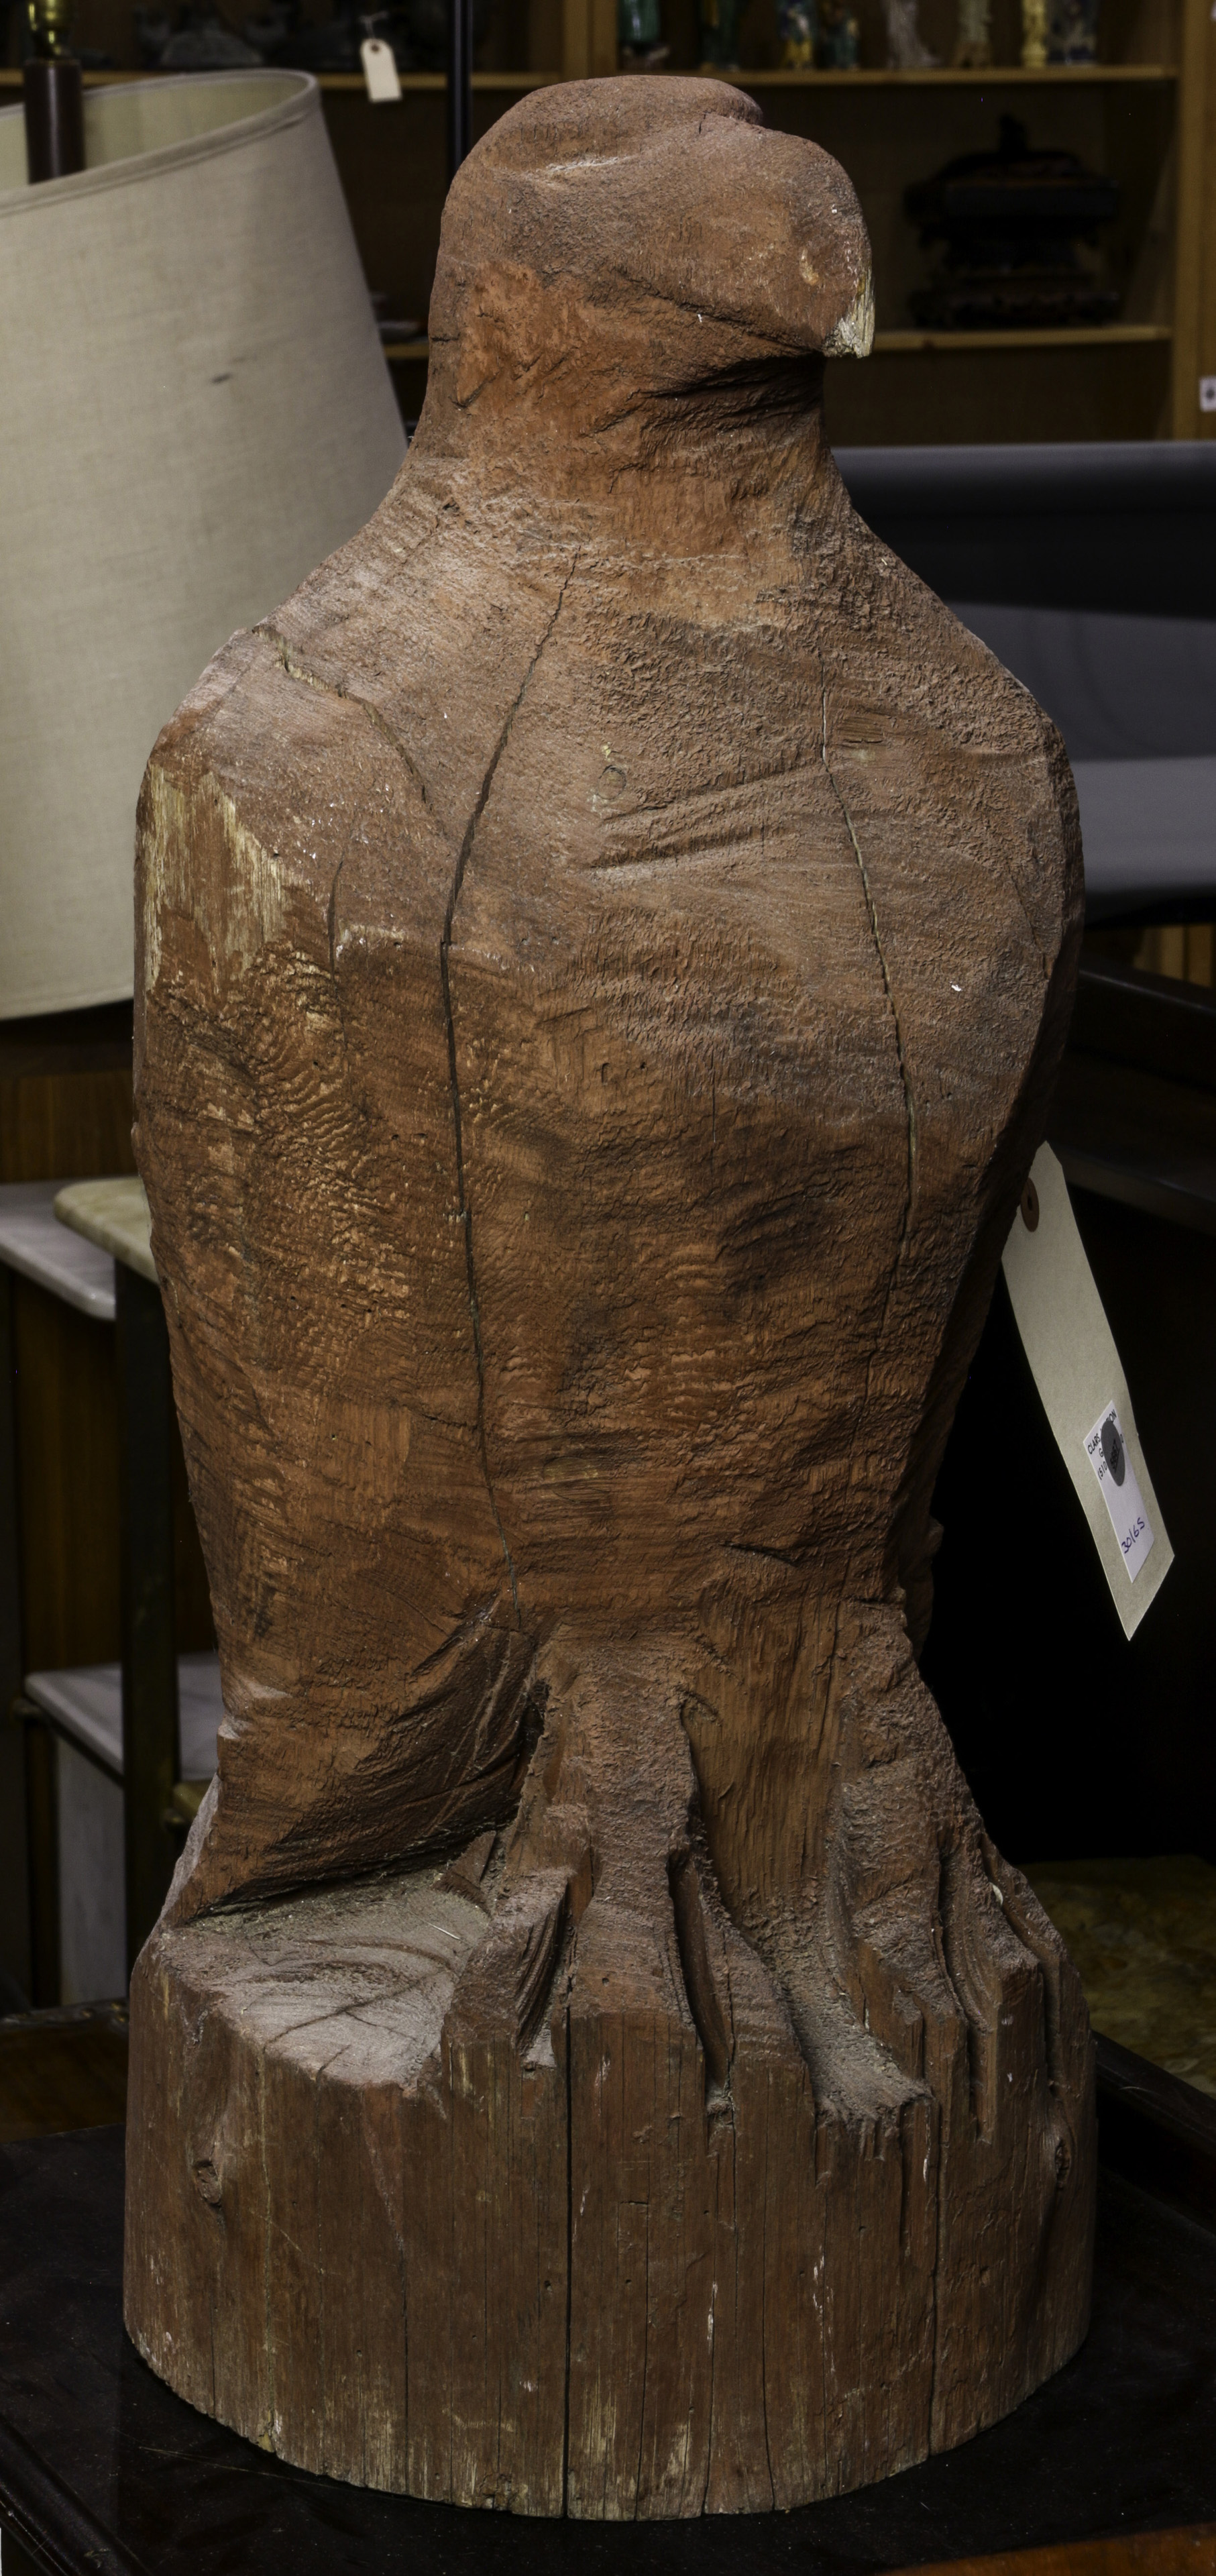 A CARVED WOOD FIGURE OF AN EAGLE